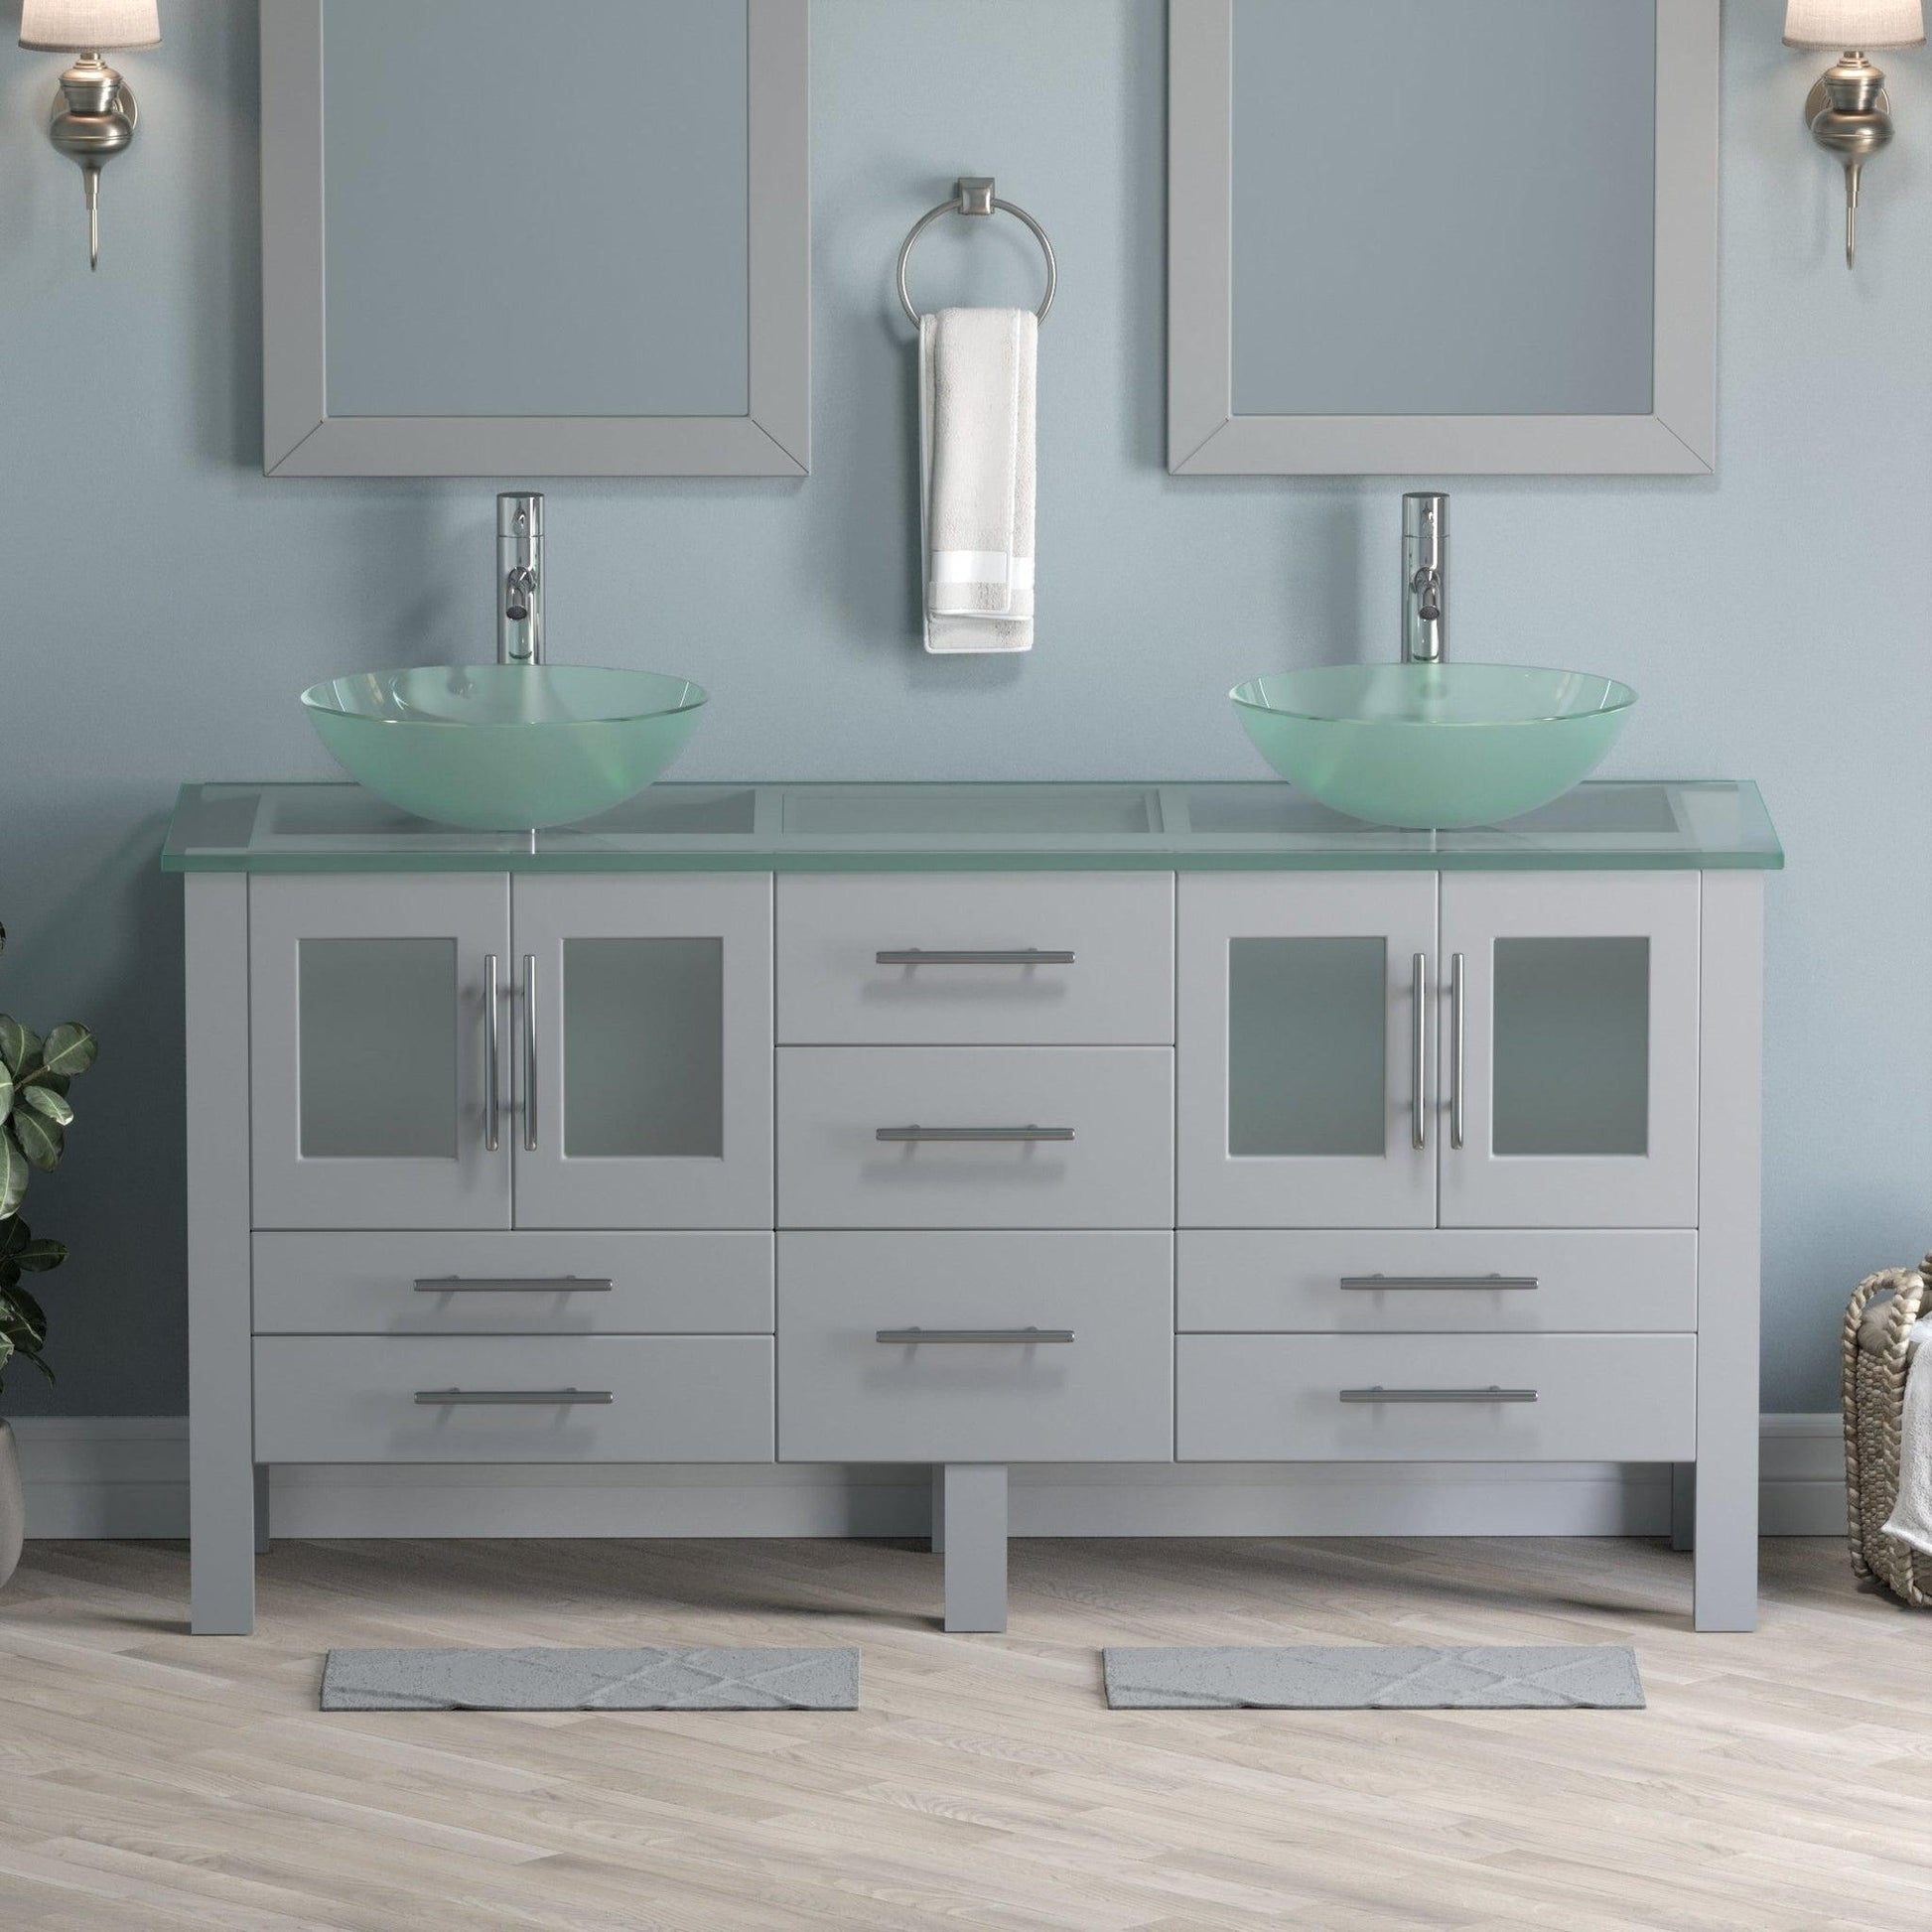 Cambridge Plumbing 63" Gray Wood Double Vanity Set With Tempered Glass Countertop And Circular Vessel Sink With Polished Chrome Plumbing Finish